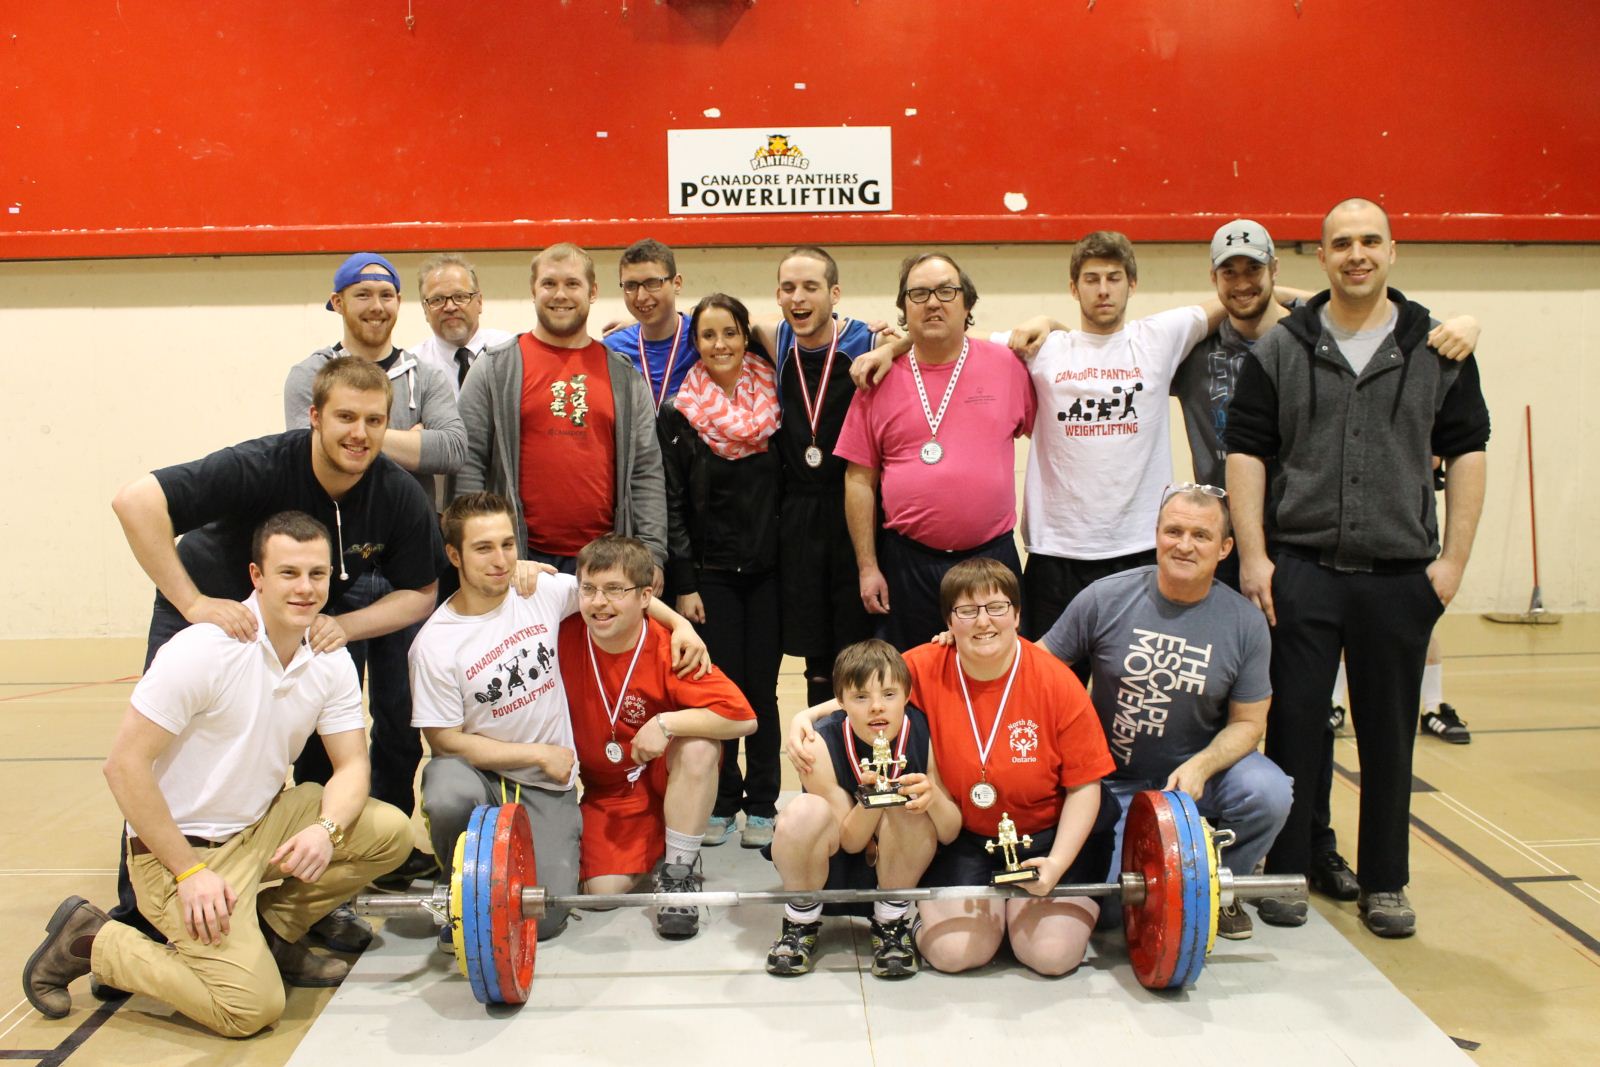 Canadore hosts Special Olympic Powerlifting event North Bay News